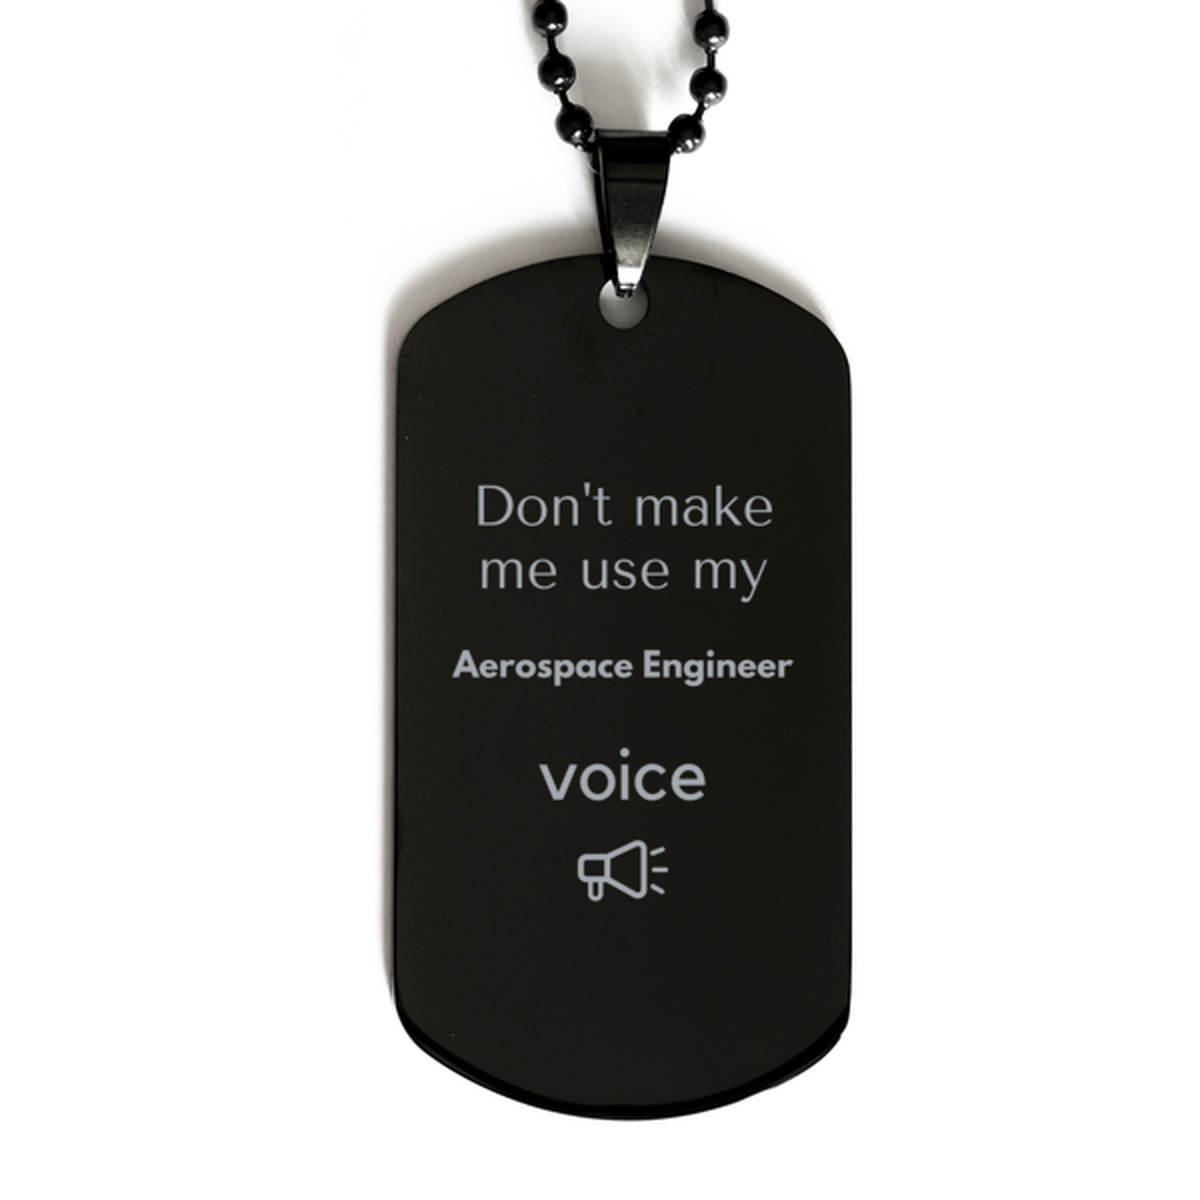 Don't make me use my Aerospace Engineer voice, Sarcasm Aerospace Engineer Gifts, Christmas Aerospace Engineer Black Dog Tag Birthday Unique Gifts For Aerospace Engineer Coworkers, Men, Women, Colleague, Friends